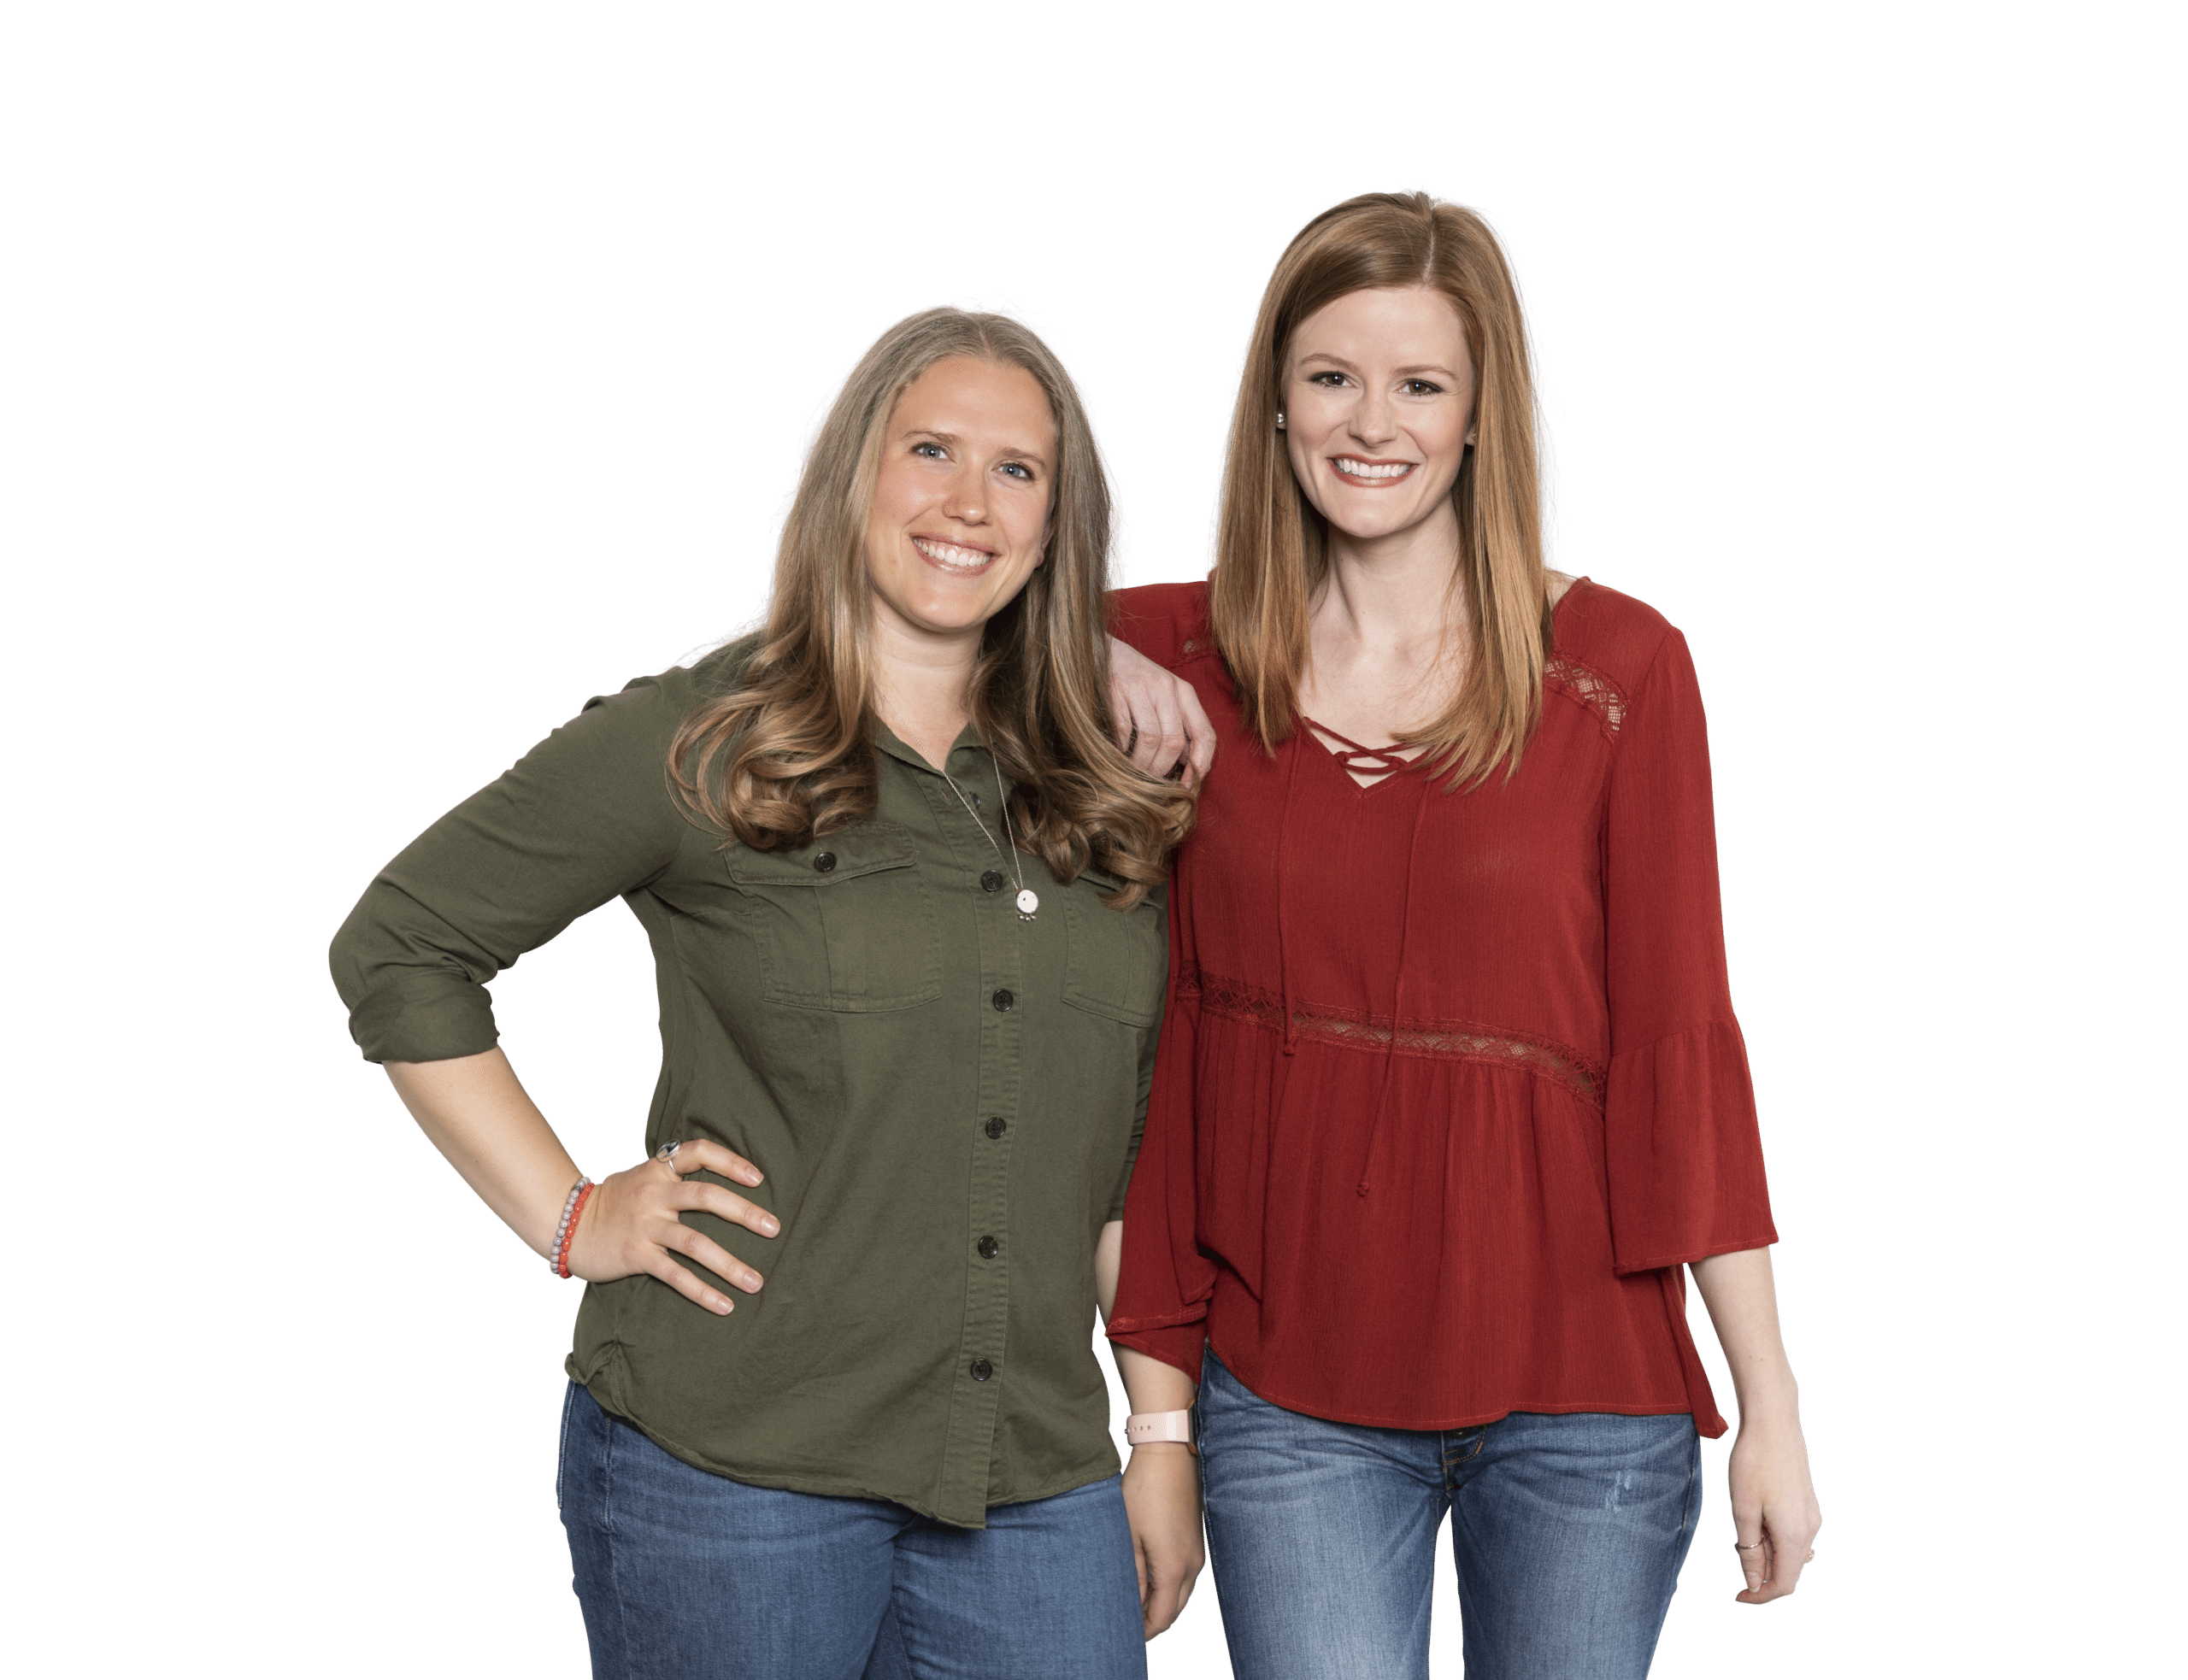 two women smiling on a plain background